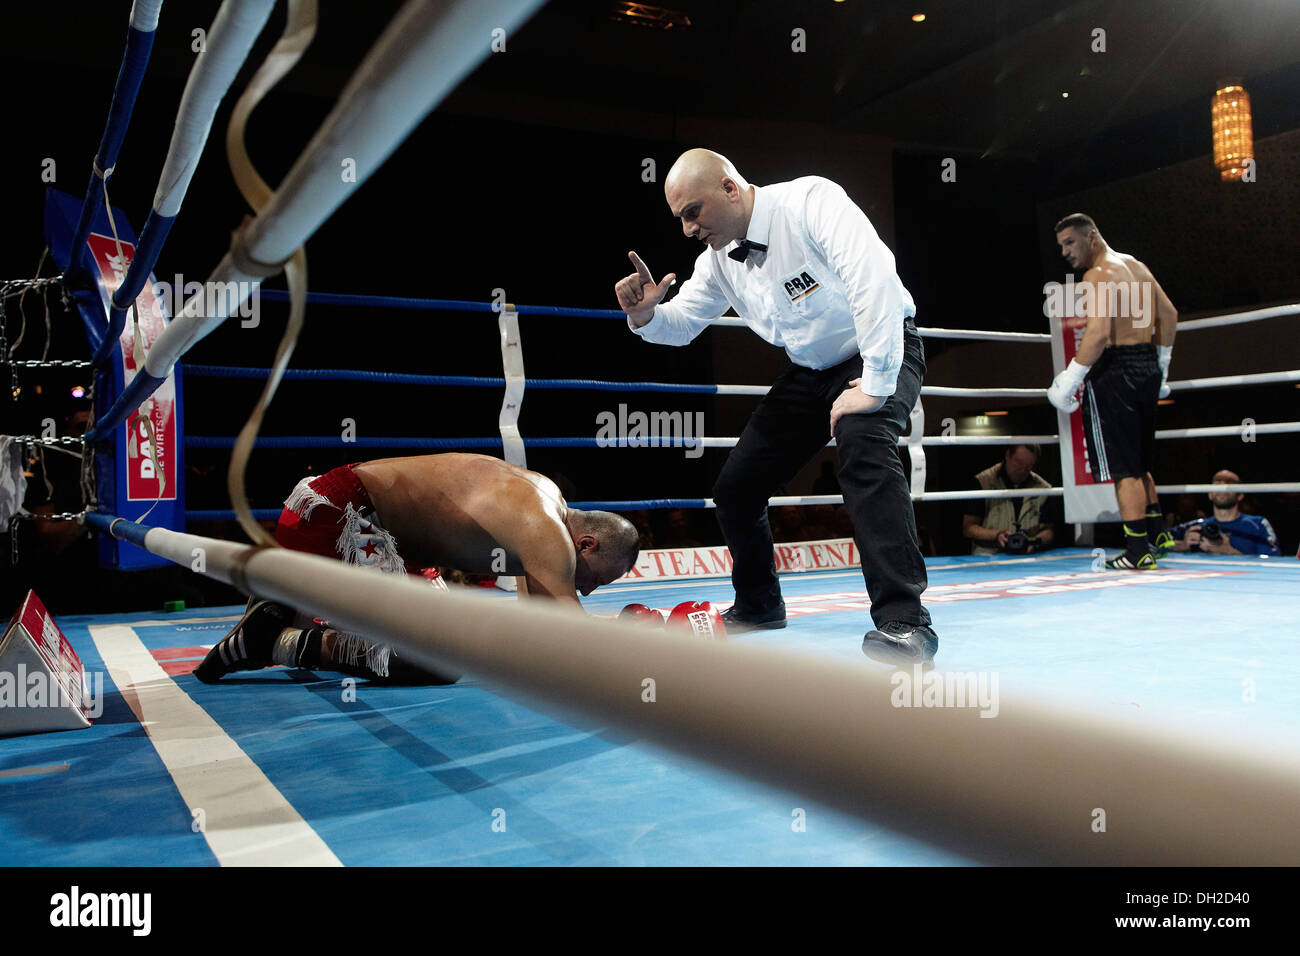 Professional boxing match, referee counting Köksal Orduhan, fight between Enad Licina and Köksal Orduhan, Rhein-Mosel-Halle Stock Photo